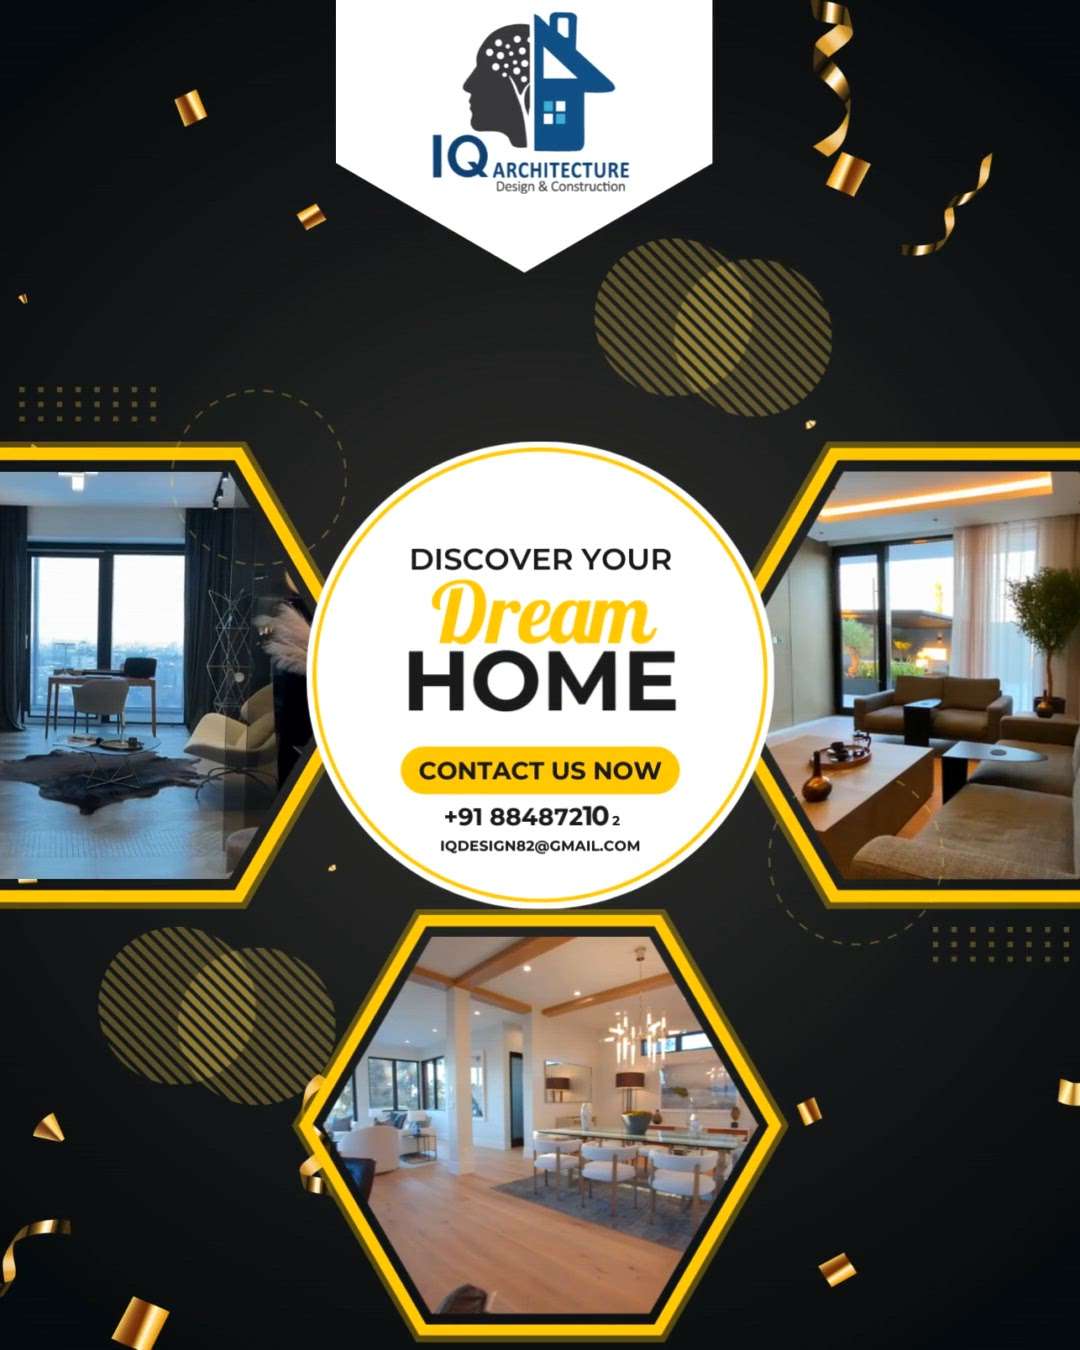 Elevating Dreams, Building Realities Explore the Art of Architecture with Iq architecture designs.

Contact us :
+91 8848721023
Iqdesign82@gmail.com

#ArchitecturalDreams #BuildingRealities #DesignInspiration #ArchitectureArtistry #DreamsToReality #ExploreArchitecture #InnovativeDesigns #CreativeSpaces #ArchitecturalExcellence #YourArchitecturePartner